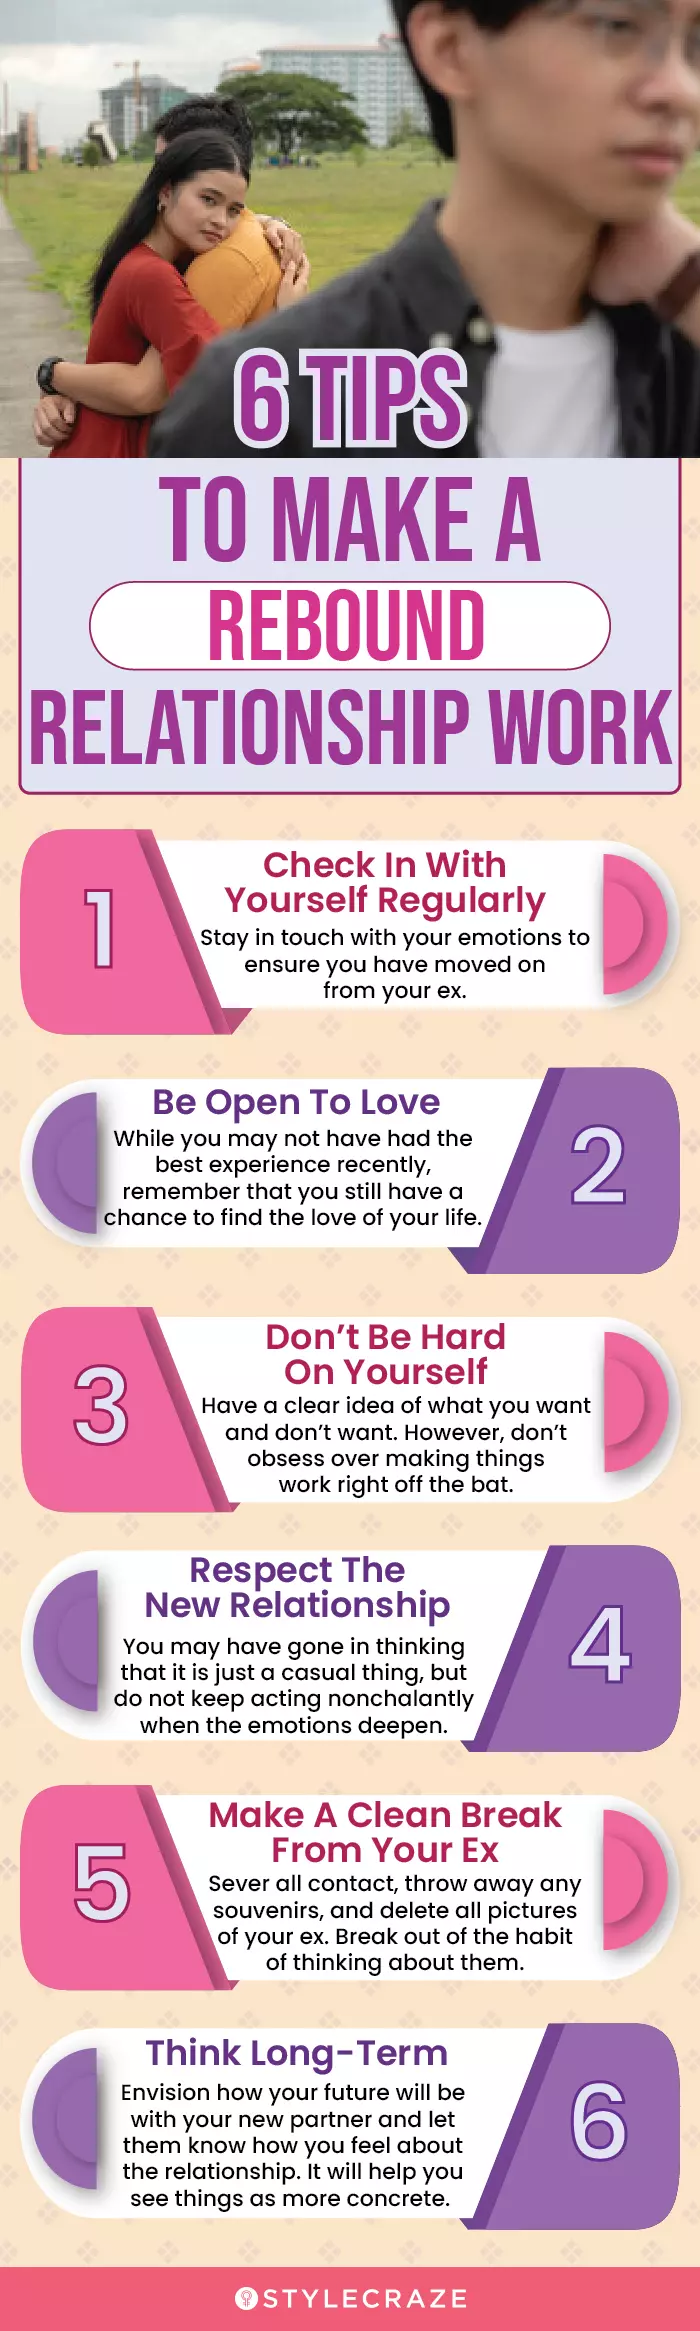 6 tips to make a rebound relationship work (infographic)